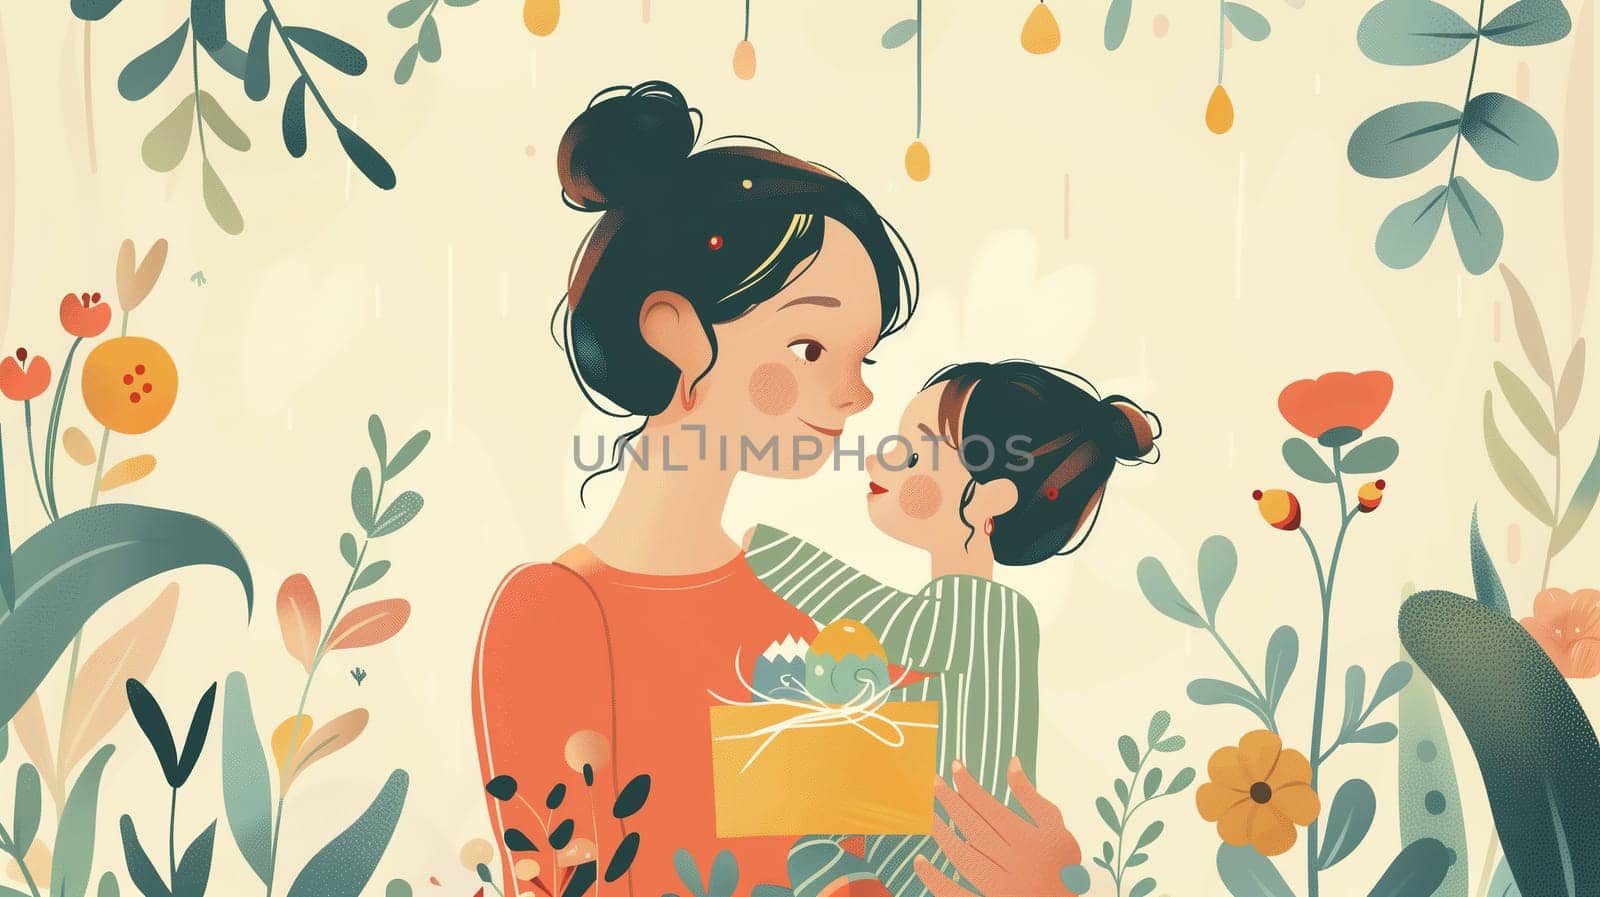 A painting depicting a woman lovingly holding a child in her arms. The womans expression conveys maternal affection and care, while the child looks content and secure. The setting appears to be intimate and personal, emphasizing the bond between mother and child.